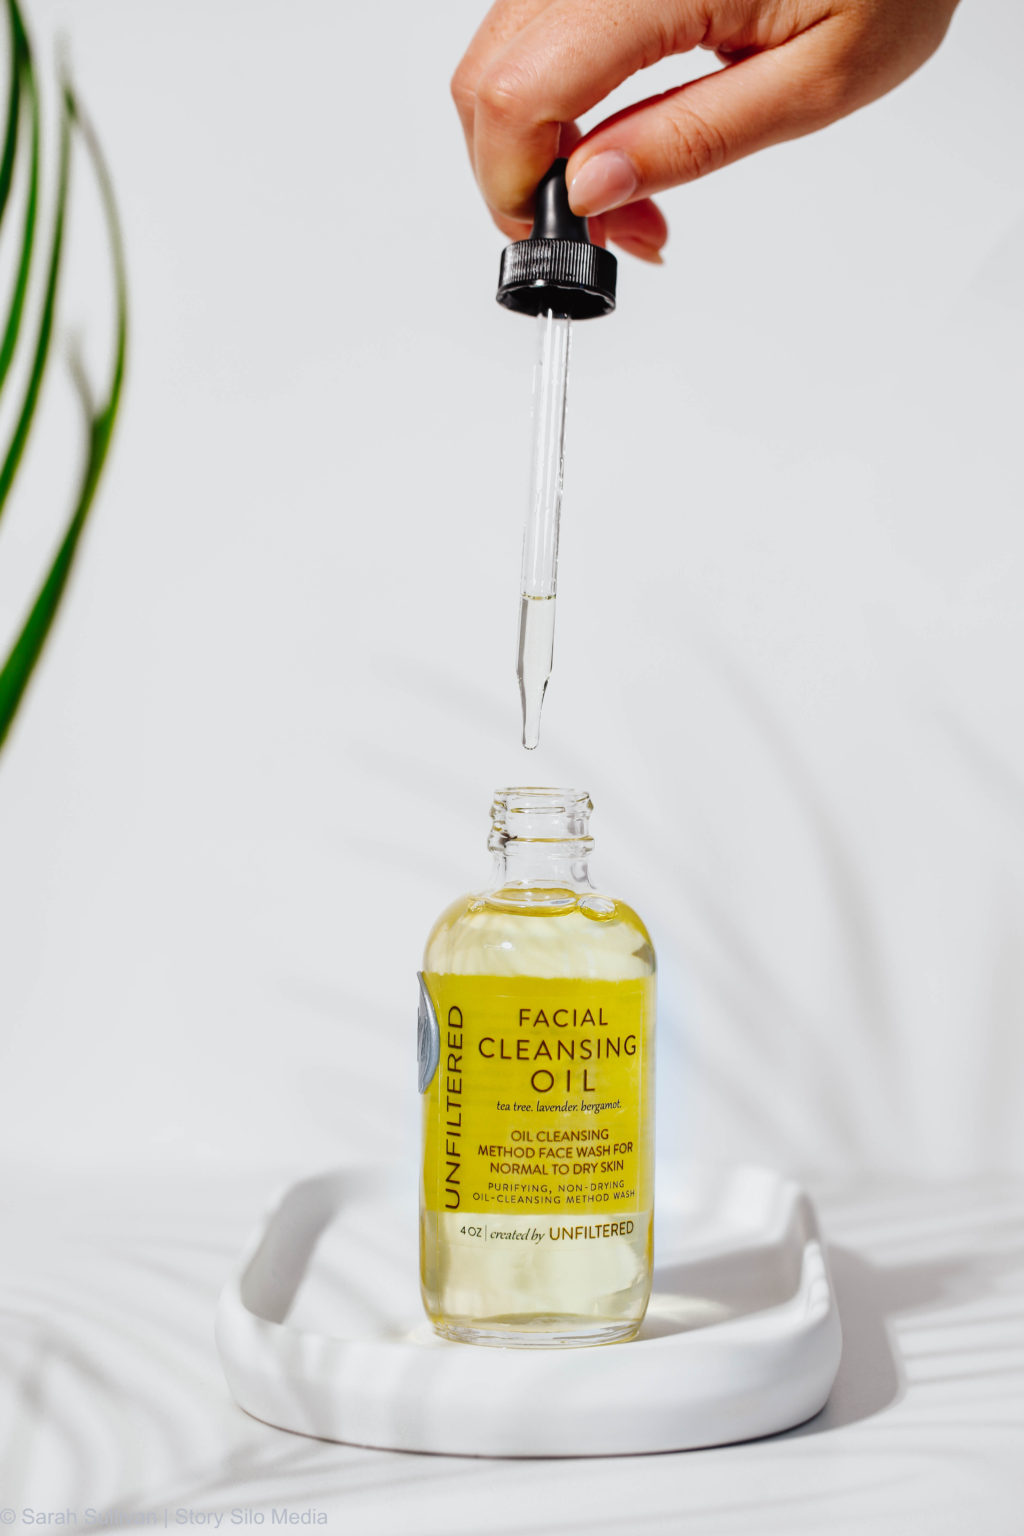 Image of a woman unscrewing a bottle of Unfiltered facial cleaning oil